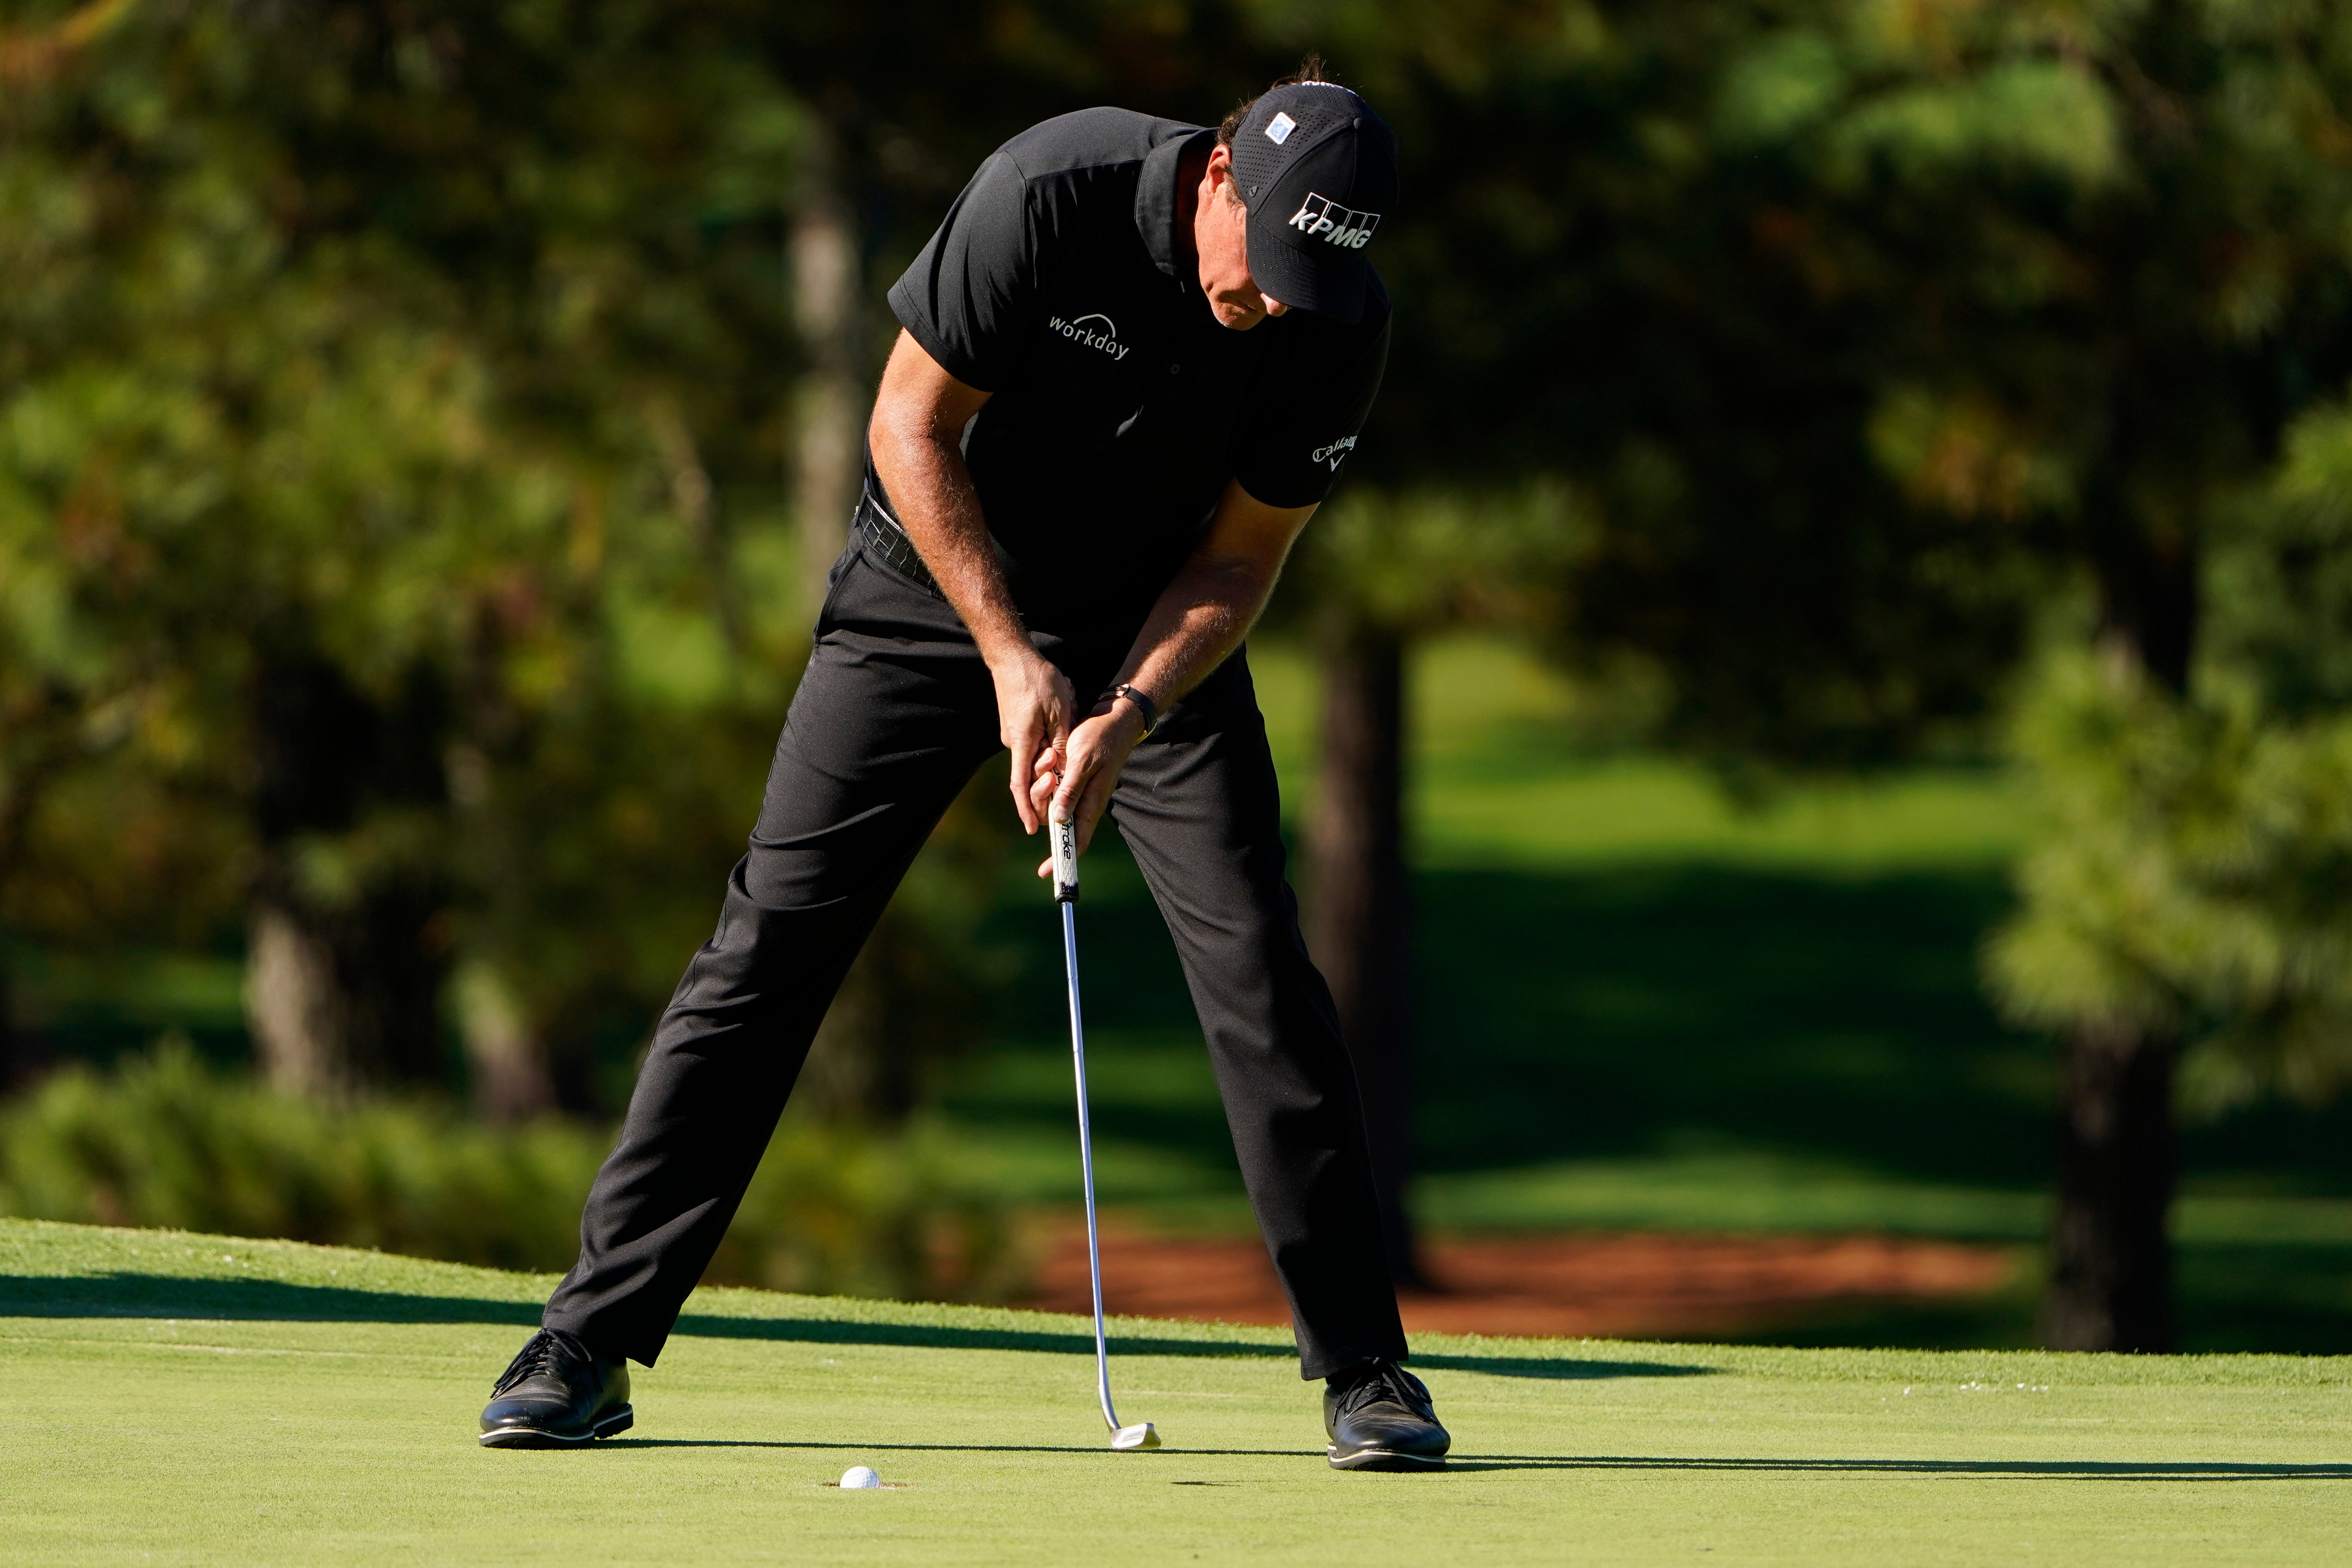 Phil Mickelson was not impressed with his putting after the second round